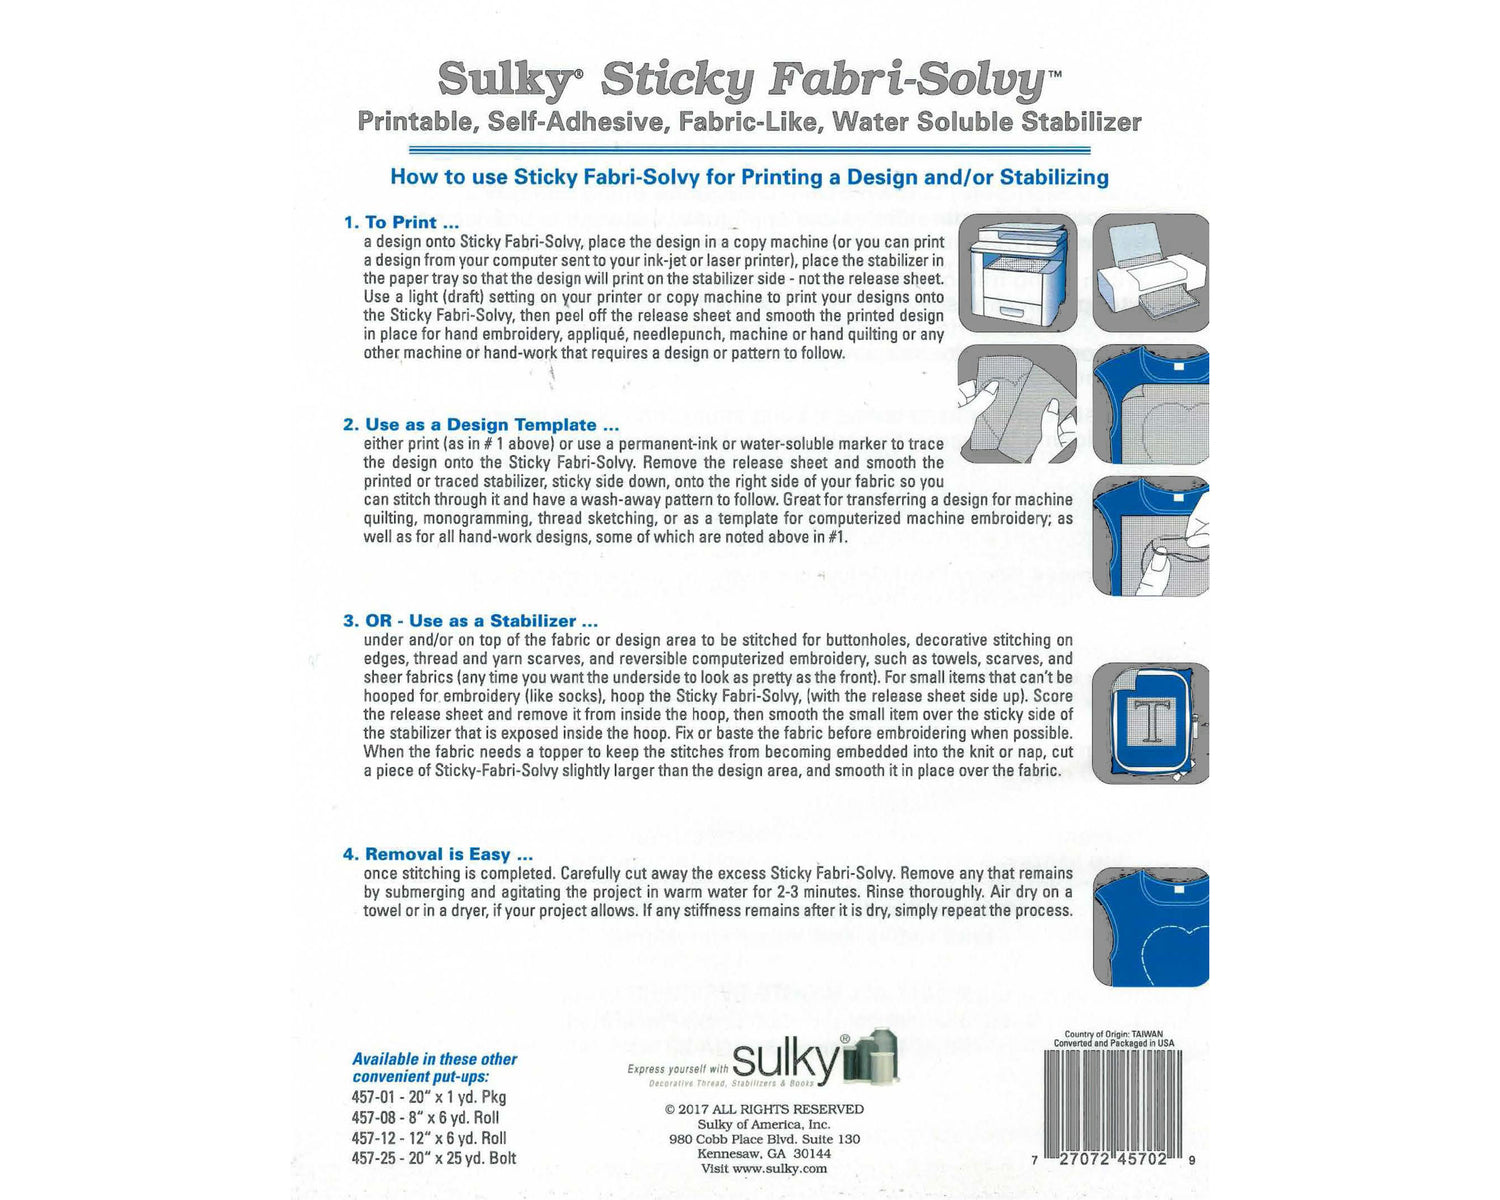 Working with Sulky Sticky Fabri-Solvy (or any soluble stabiliser!)